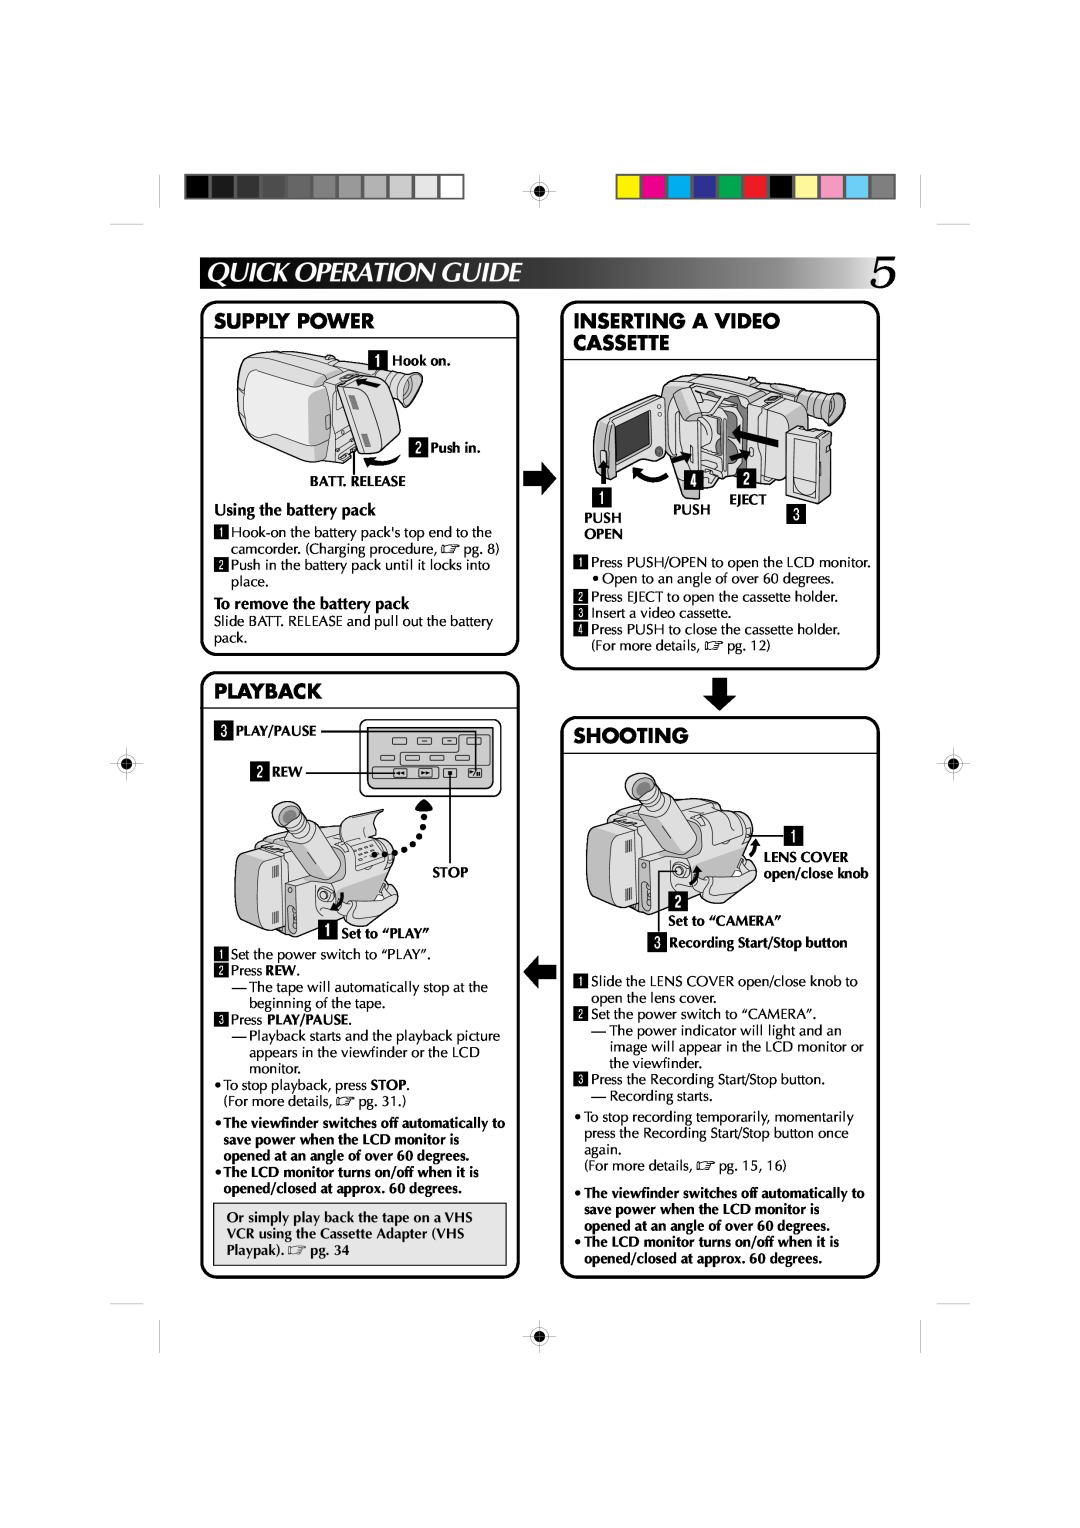 JVC GR-AXM1U Quick Operation Guide, Supply Power, Playback, Inserting A Video Cassette, Shooting, Using the battery pack 